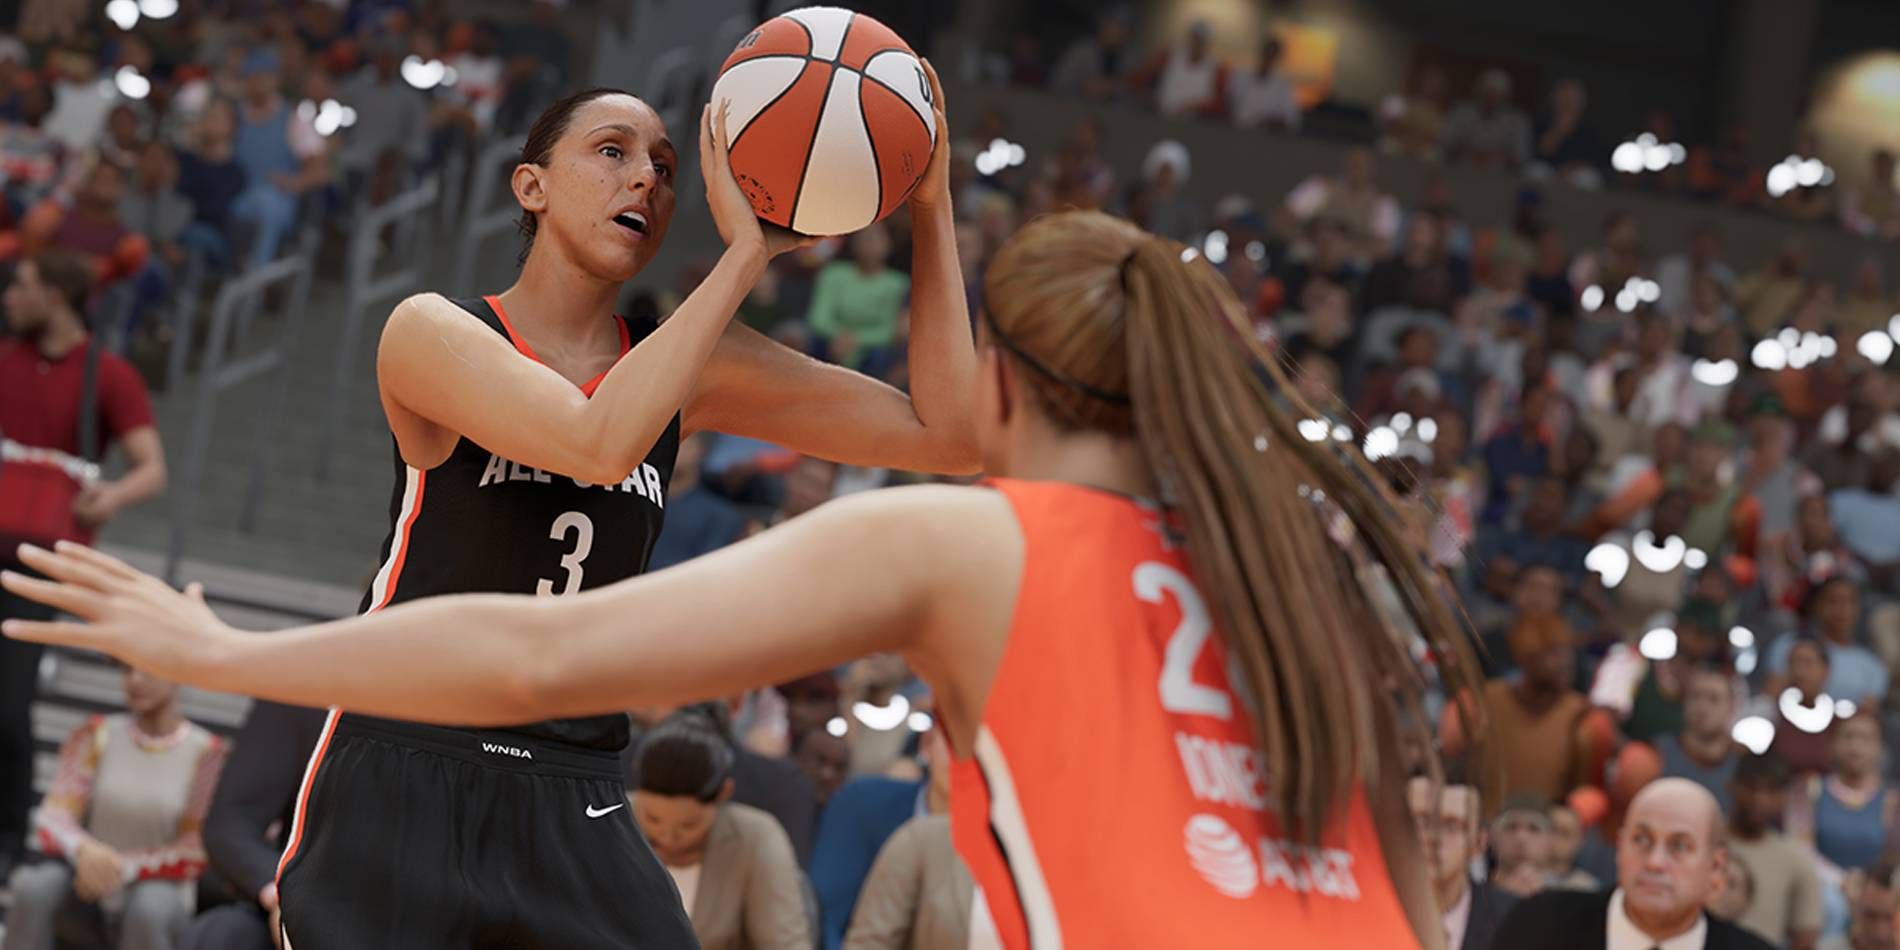 NBA 2K23 WNBA Player Wearing Number 3 Jersey Going for A Shot From Three Point Line